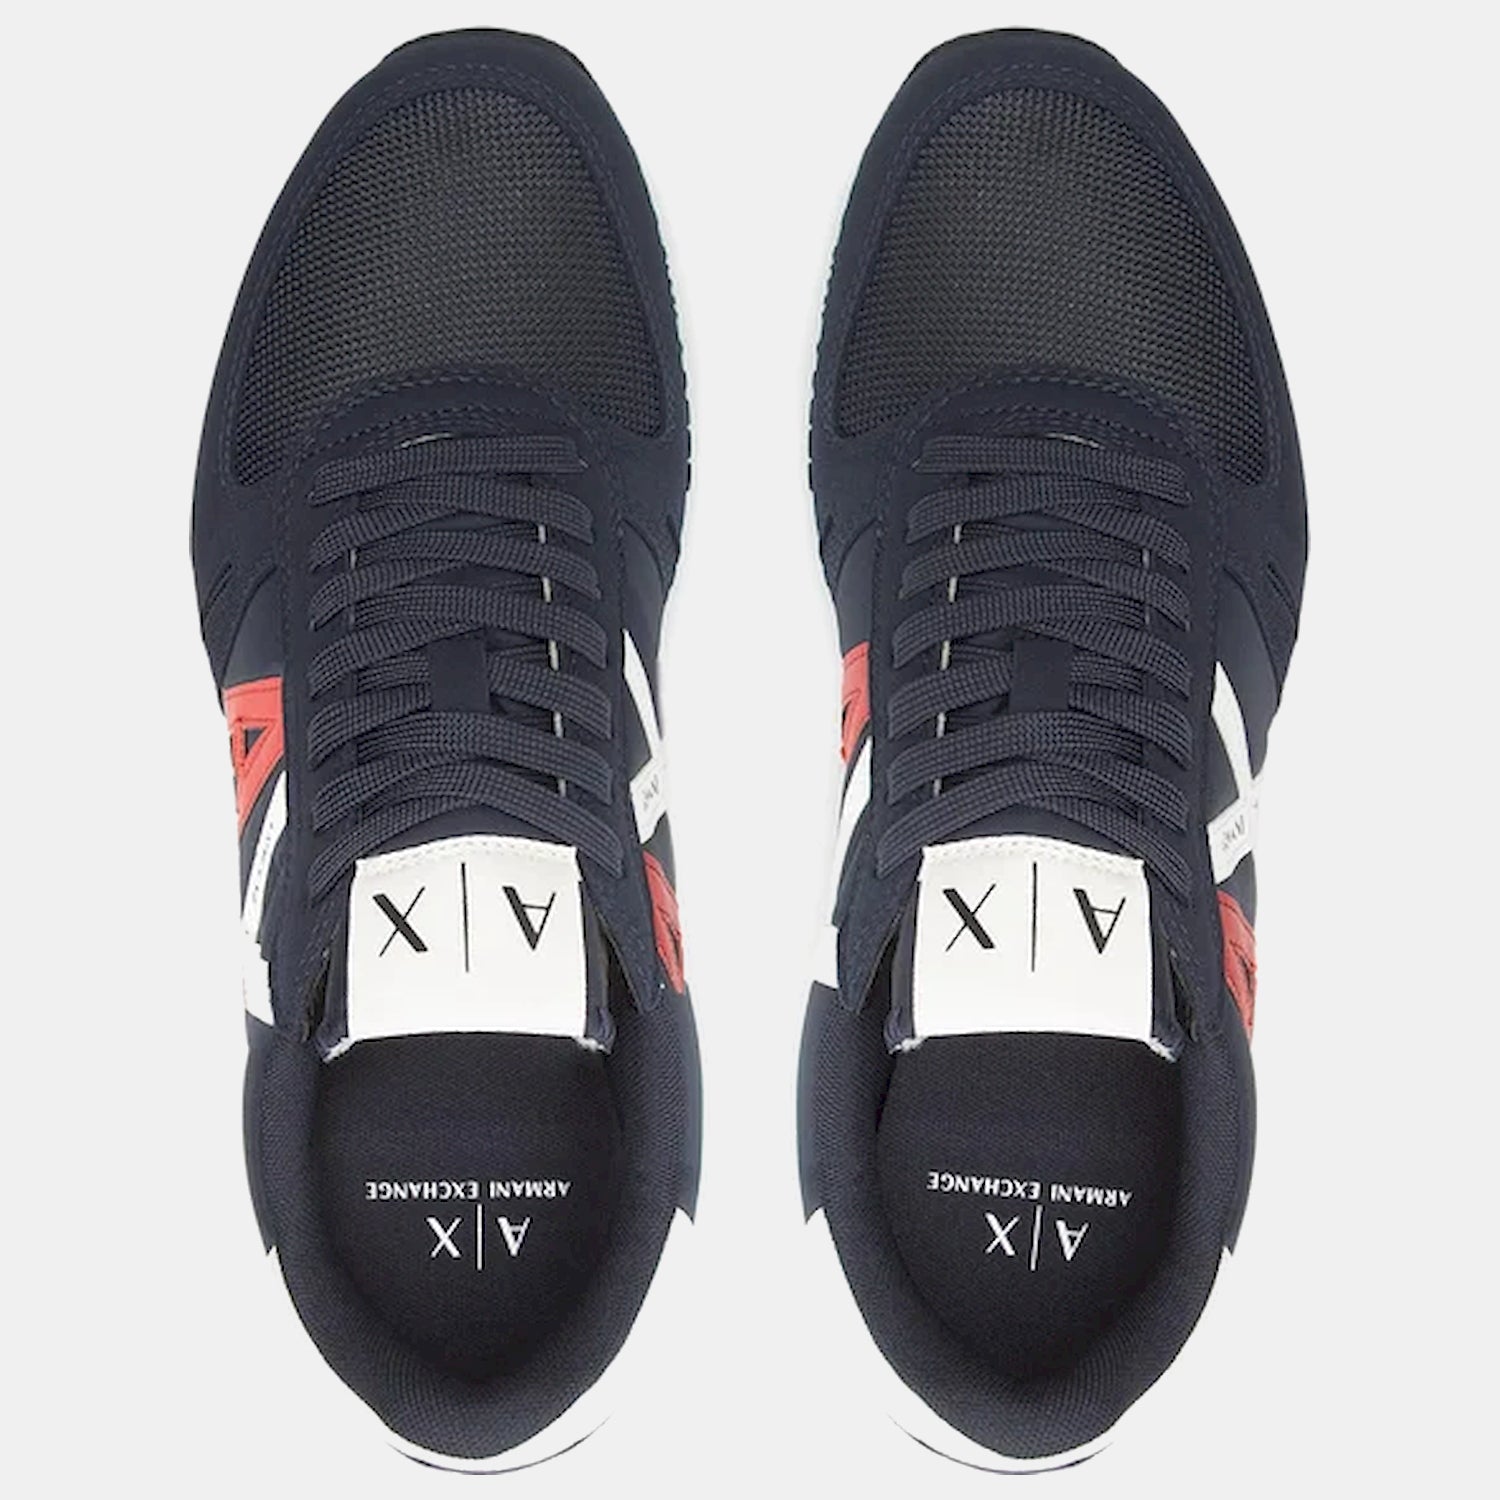 Armani Exchange Sapatilhas Sneakers Shoes Xux017 Xv028 Navy Red Navy Vermelho_shot3